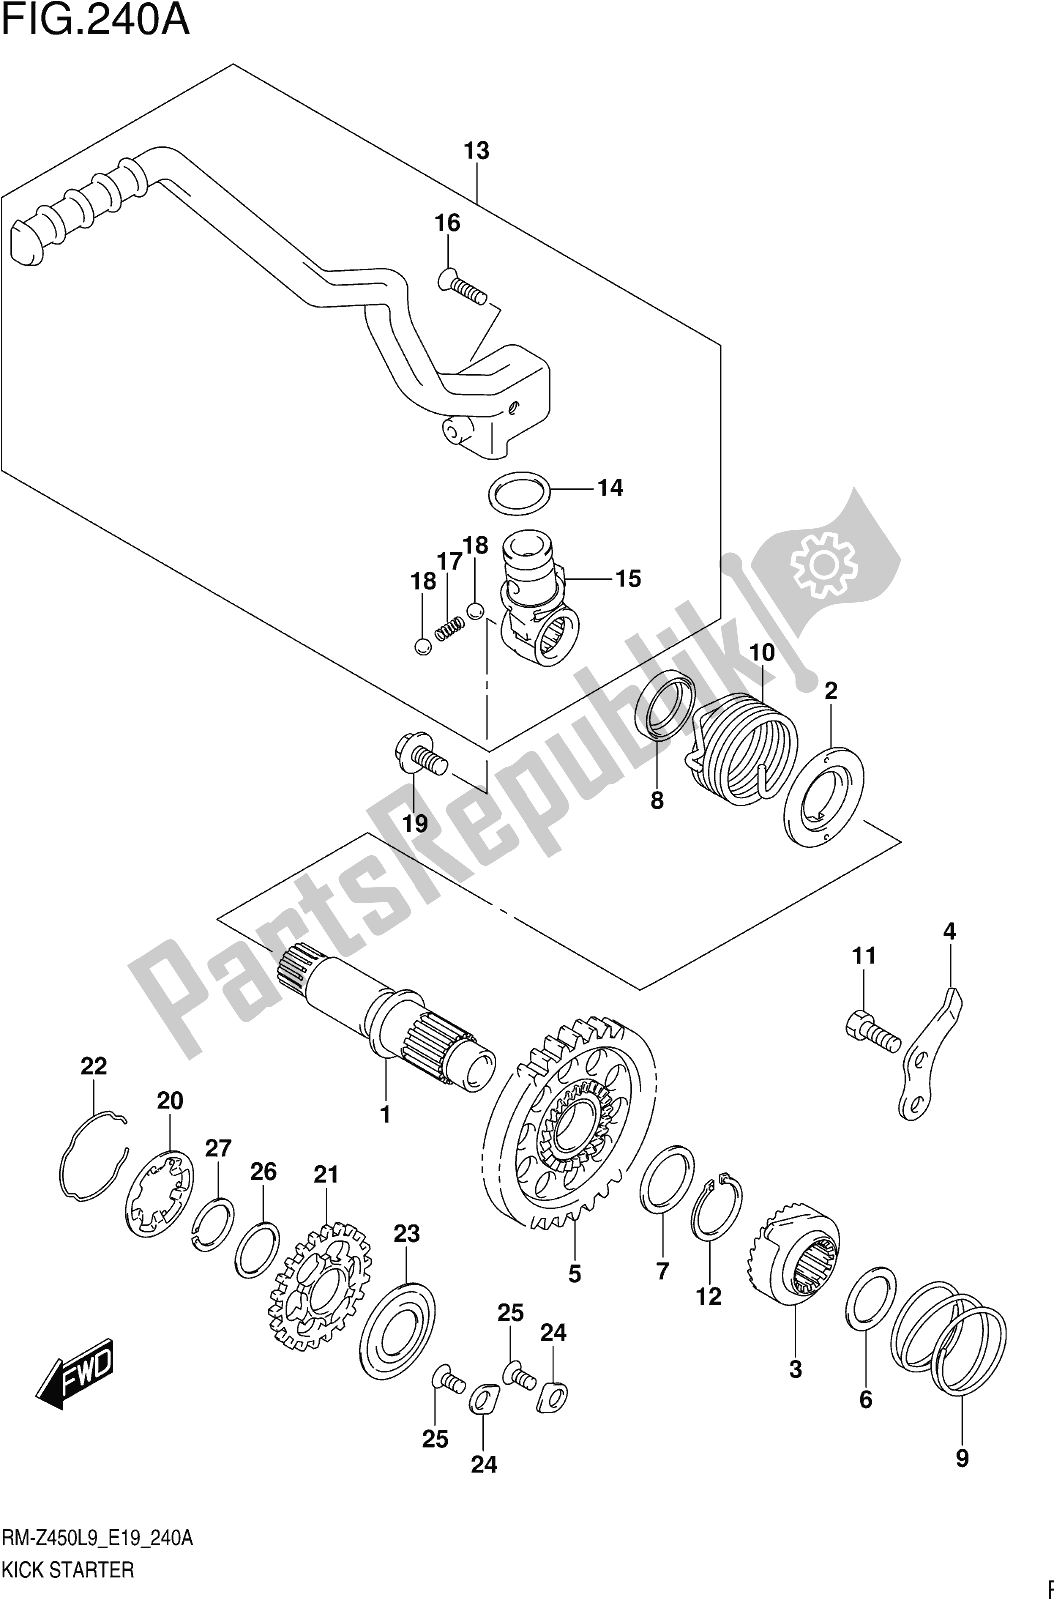 All parts for the Fig. 240a Kick Starter of the Suzuki RM-Z 450 2019